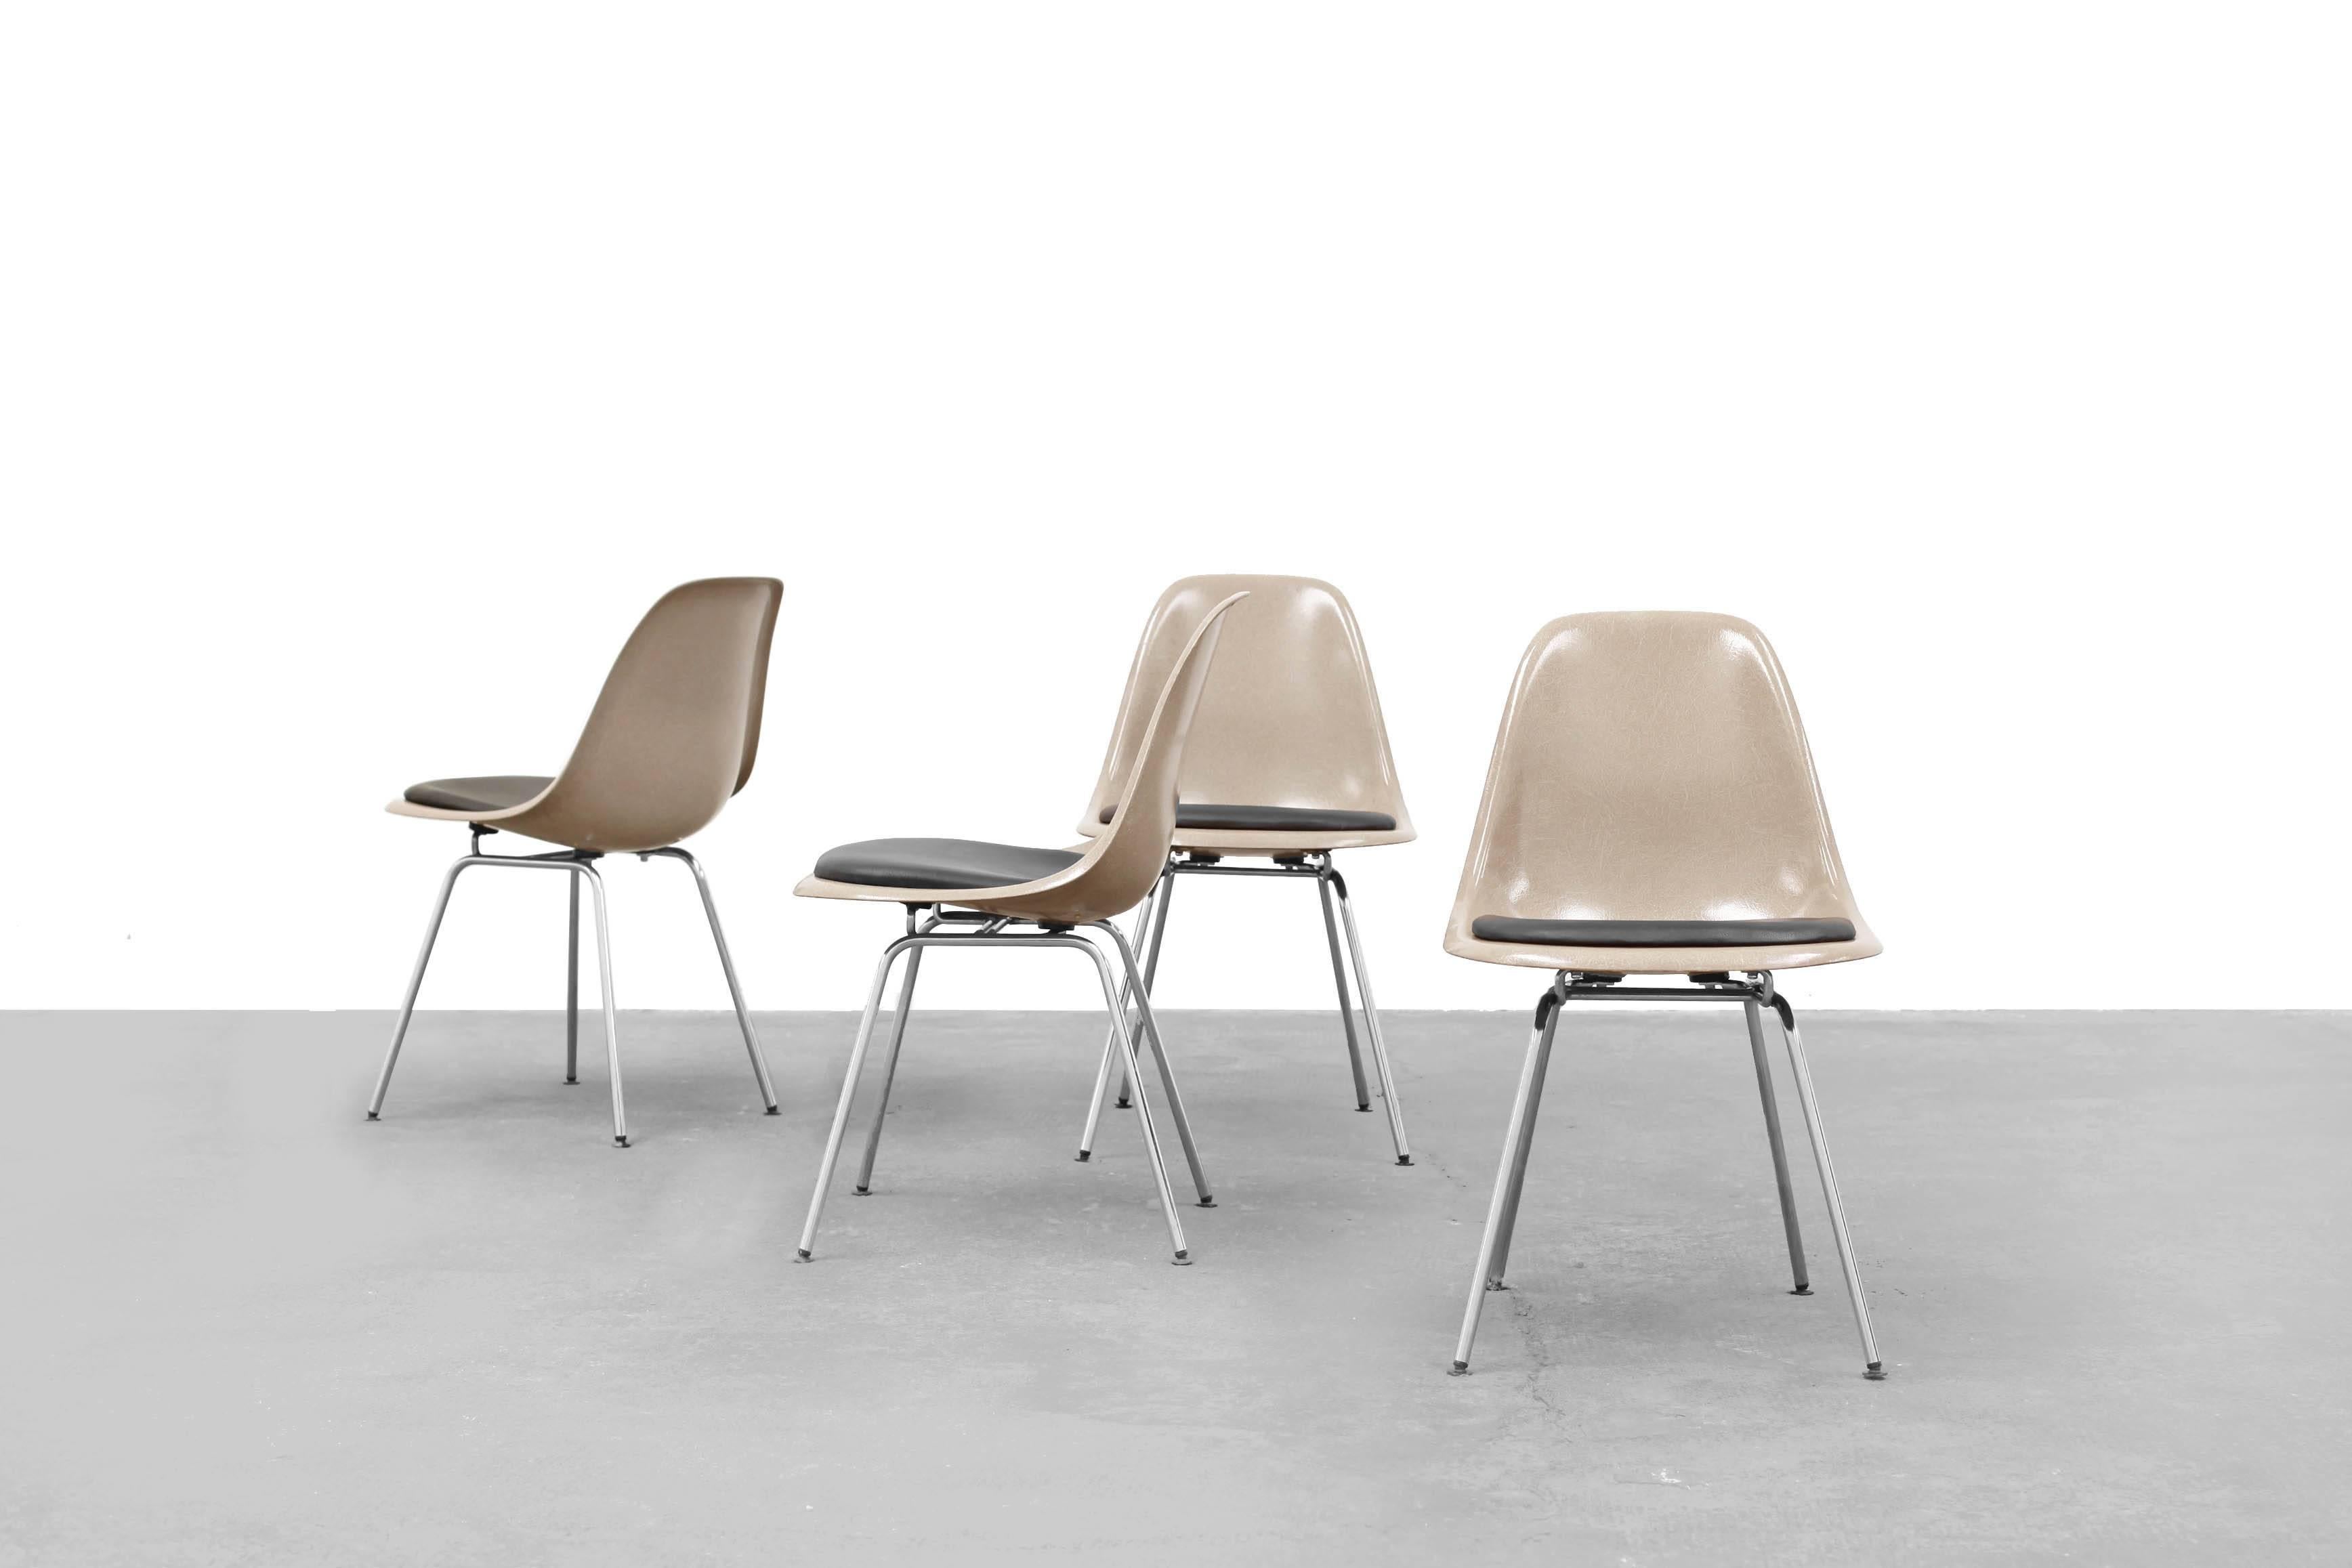 Set of four fiberglass side chairs by Ray & Charles Eames for Herman Miller.
This set in 